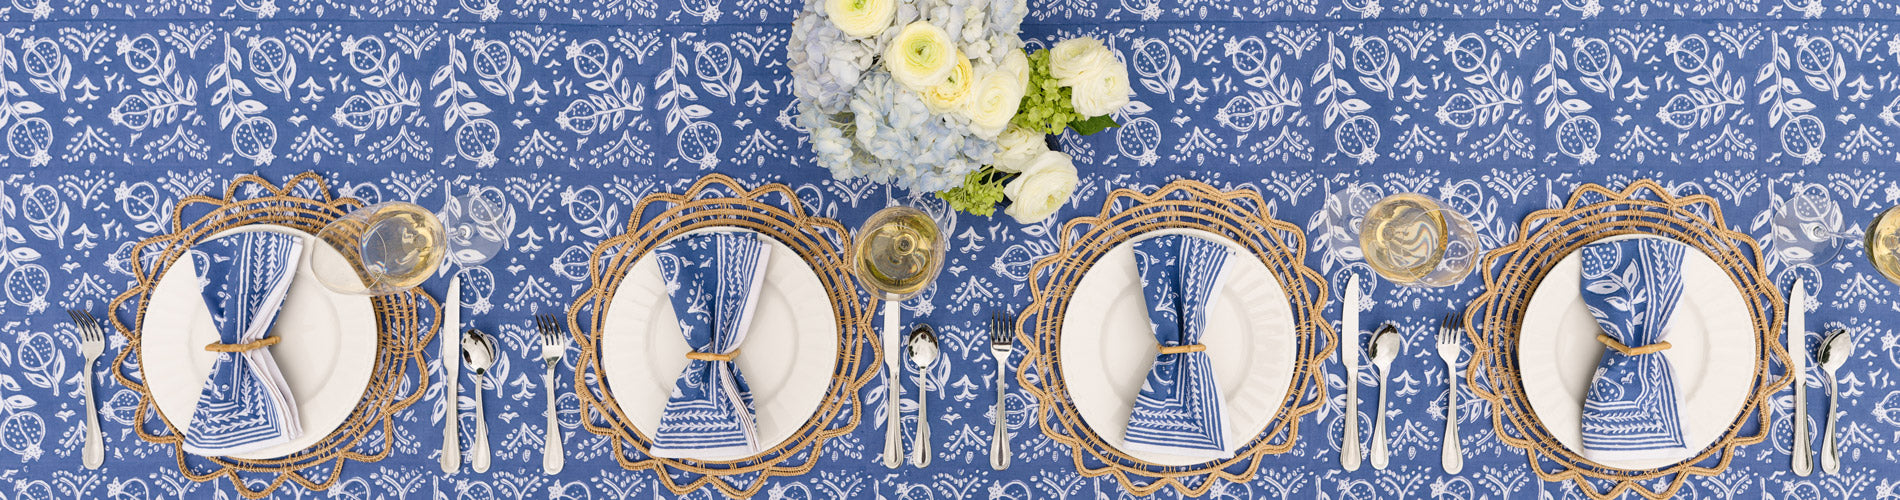 pomegranate blue napkins on white plate with wicker chargers and bamboo napkin rings